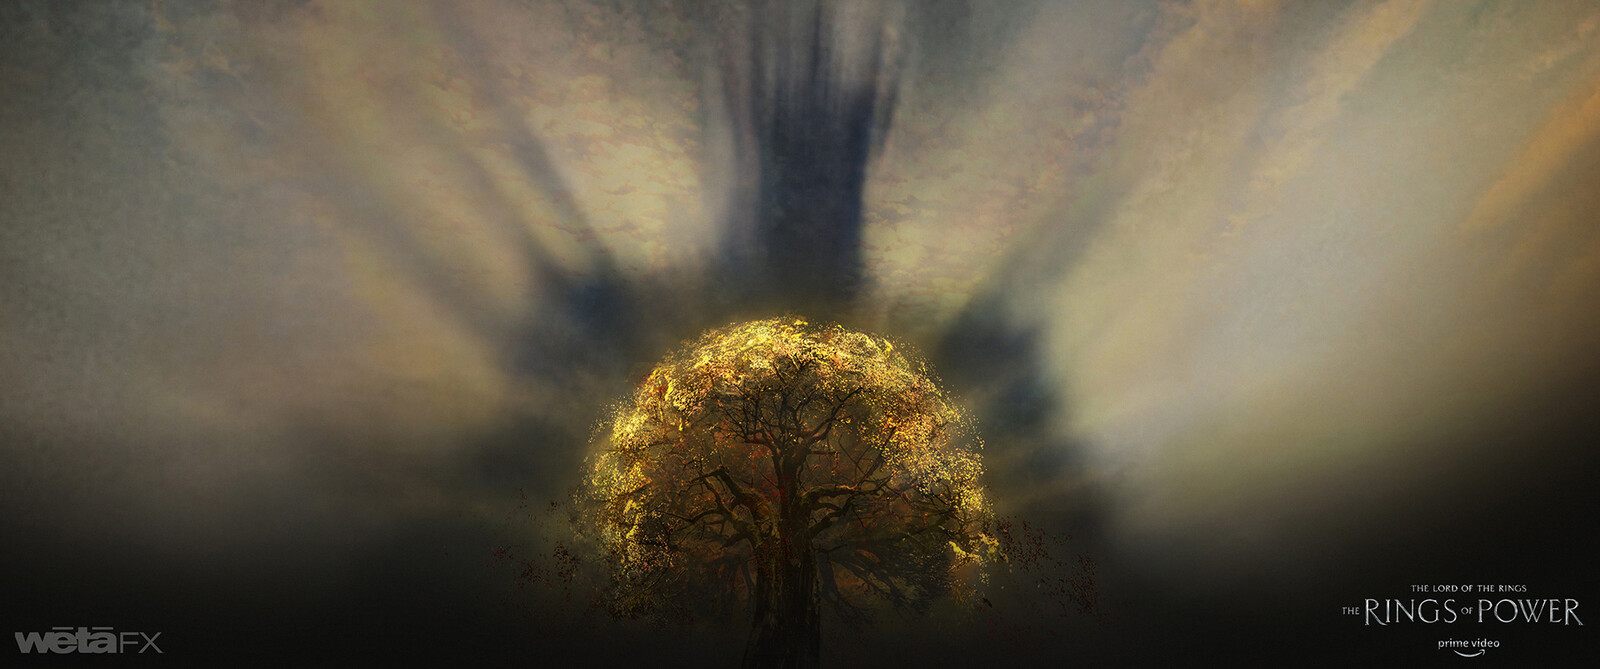 This was close to what ended up in the prologue of episode 1, utilizing an atmospheric shadow of Morgoth growing as the tree's light is extinguished.